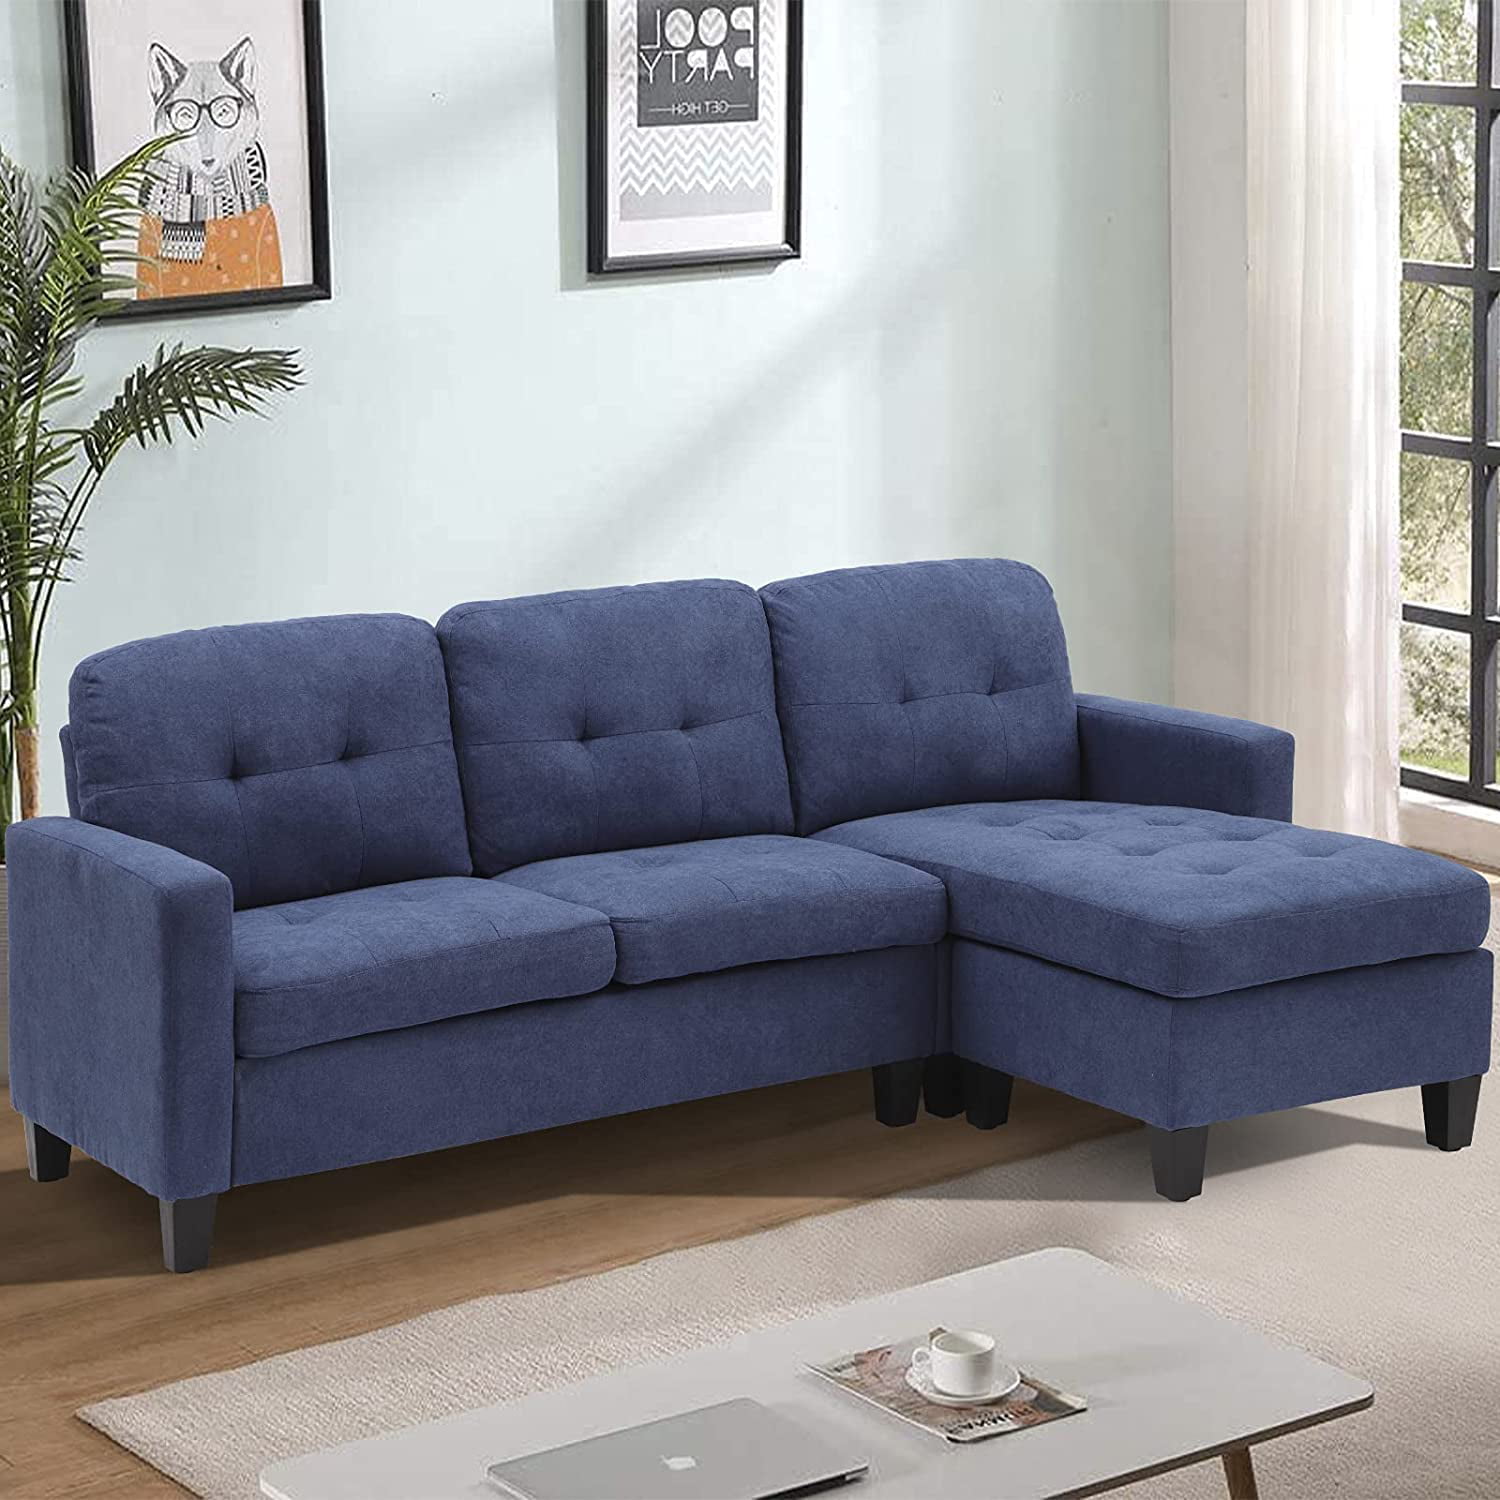 EAYY Convertible Sectional Sofa Couch, L-Shaped Couch with Modern Linen ...